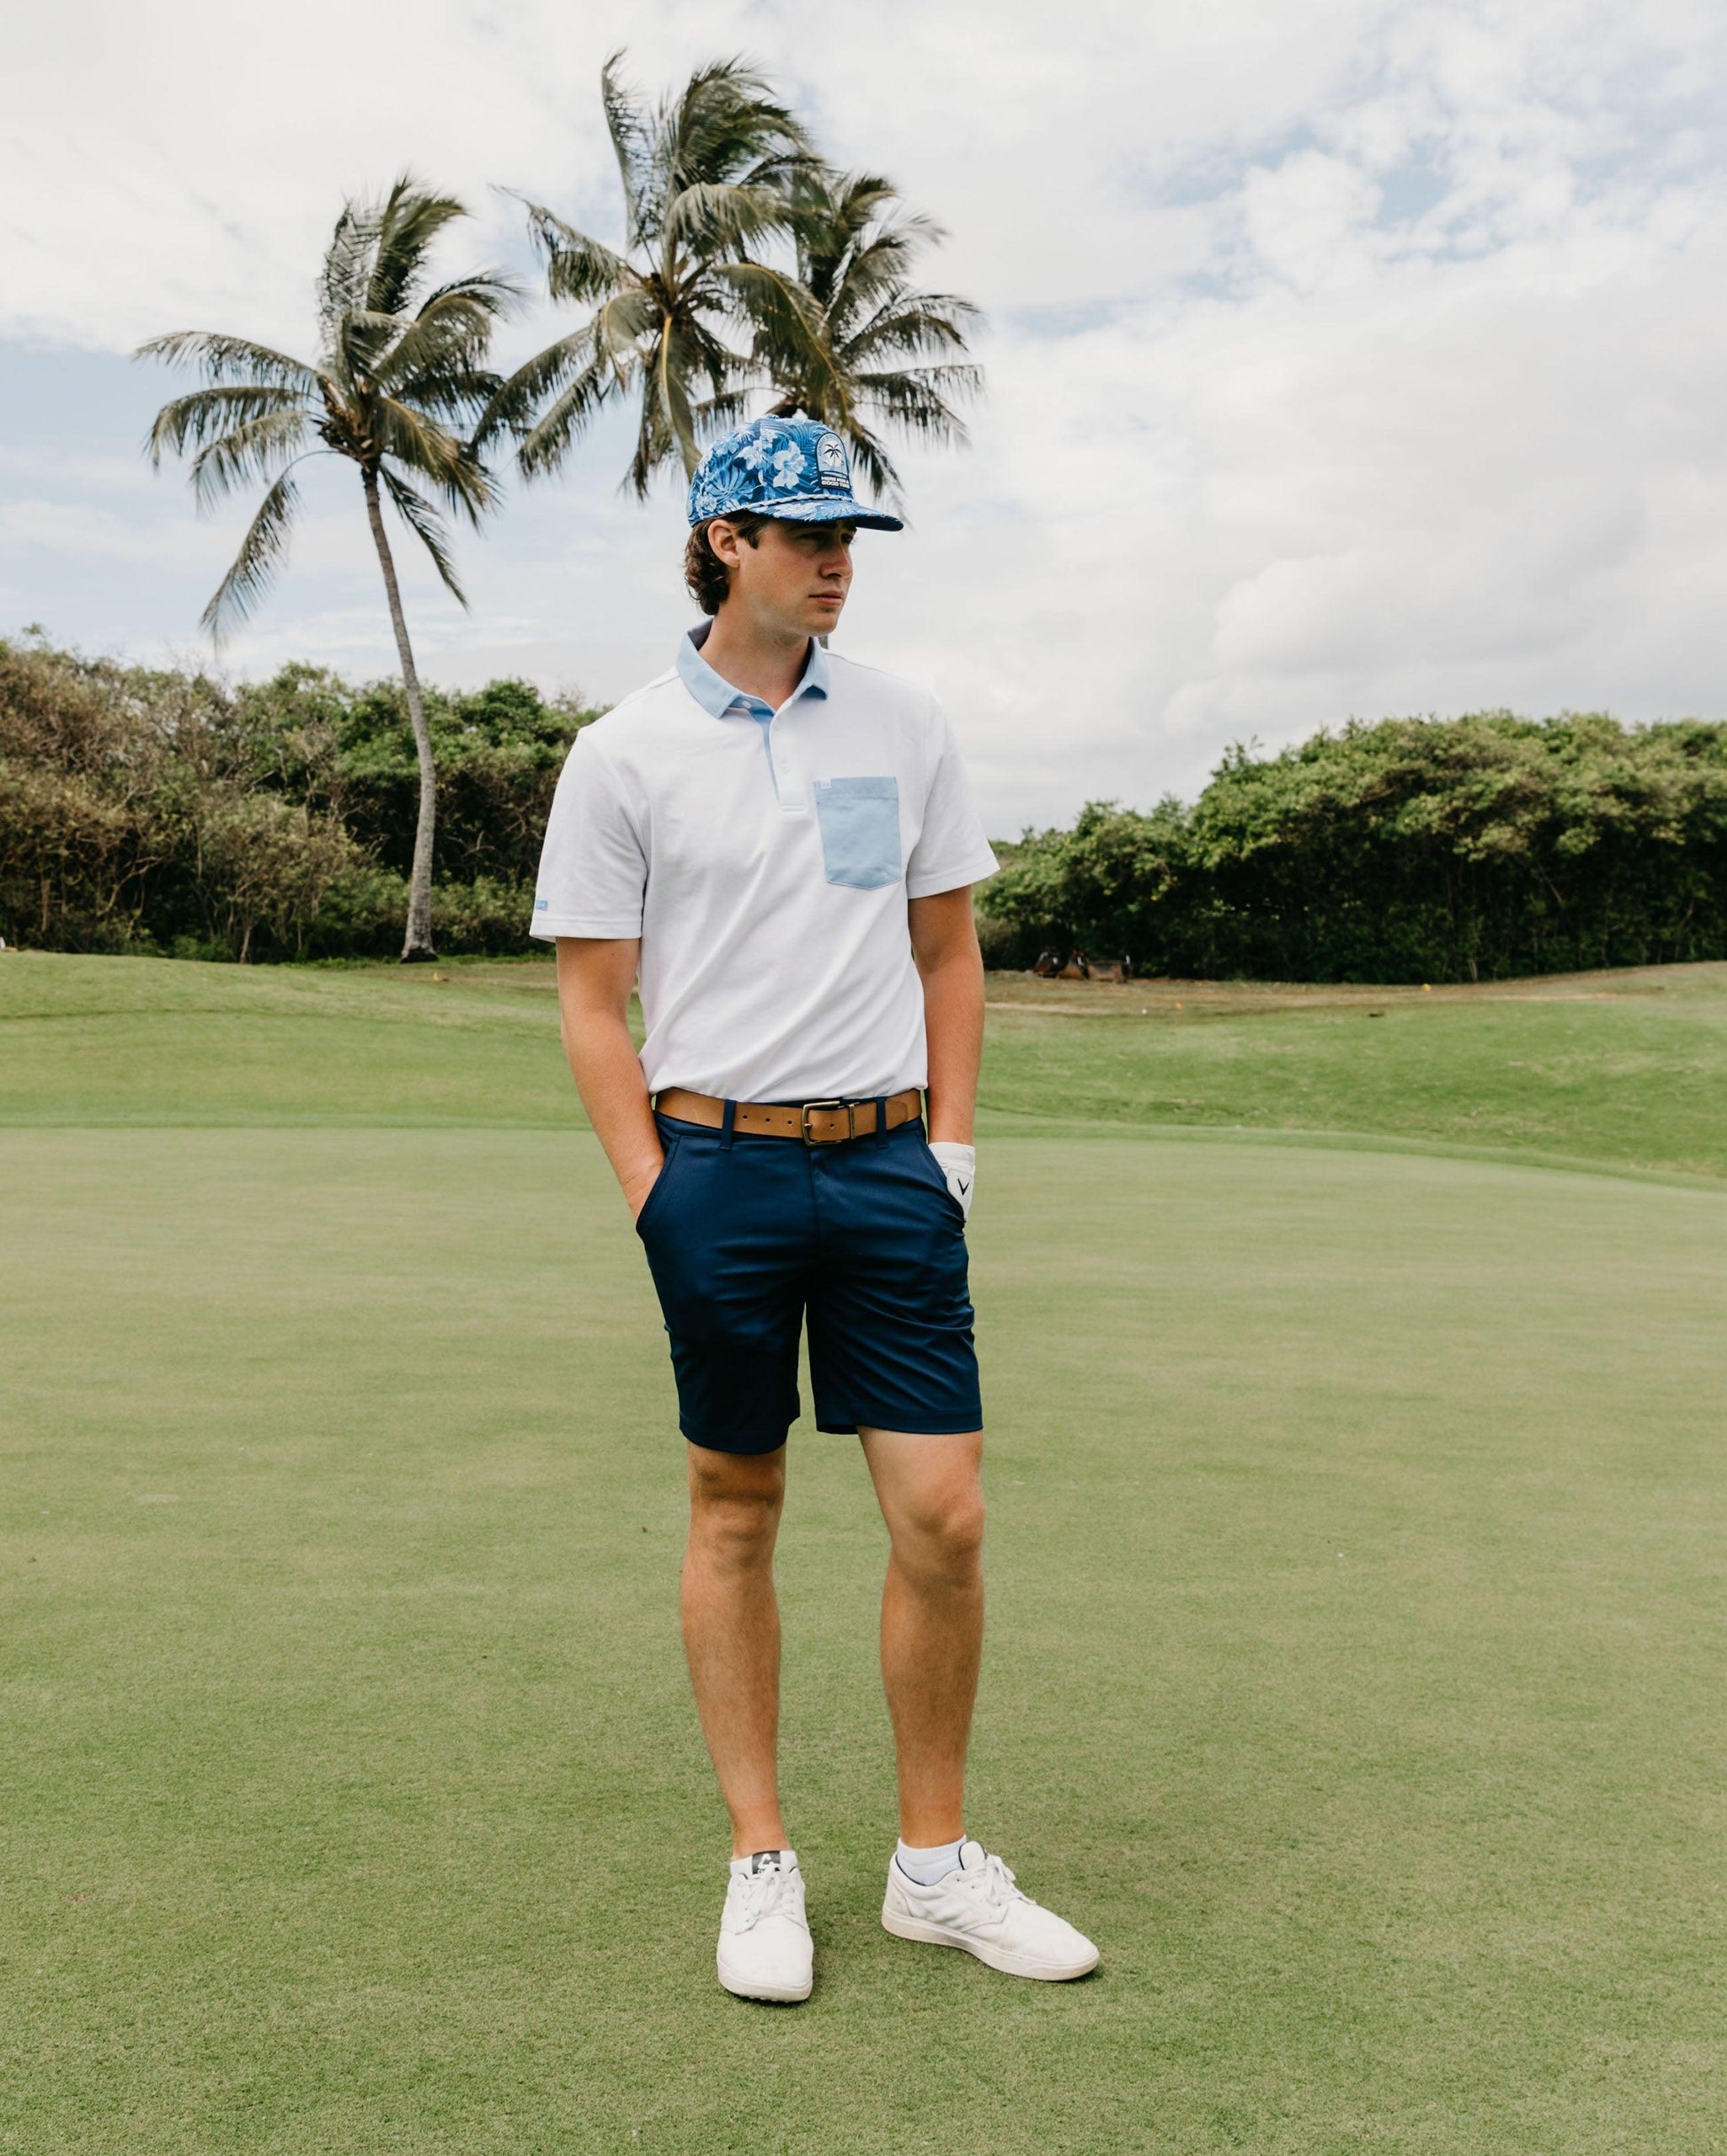 Go Low Pocket Polo - Spring Performance Polo by Good Good Golf